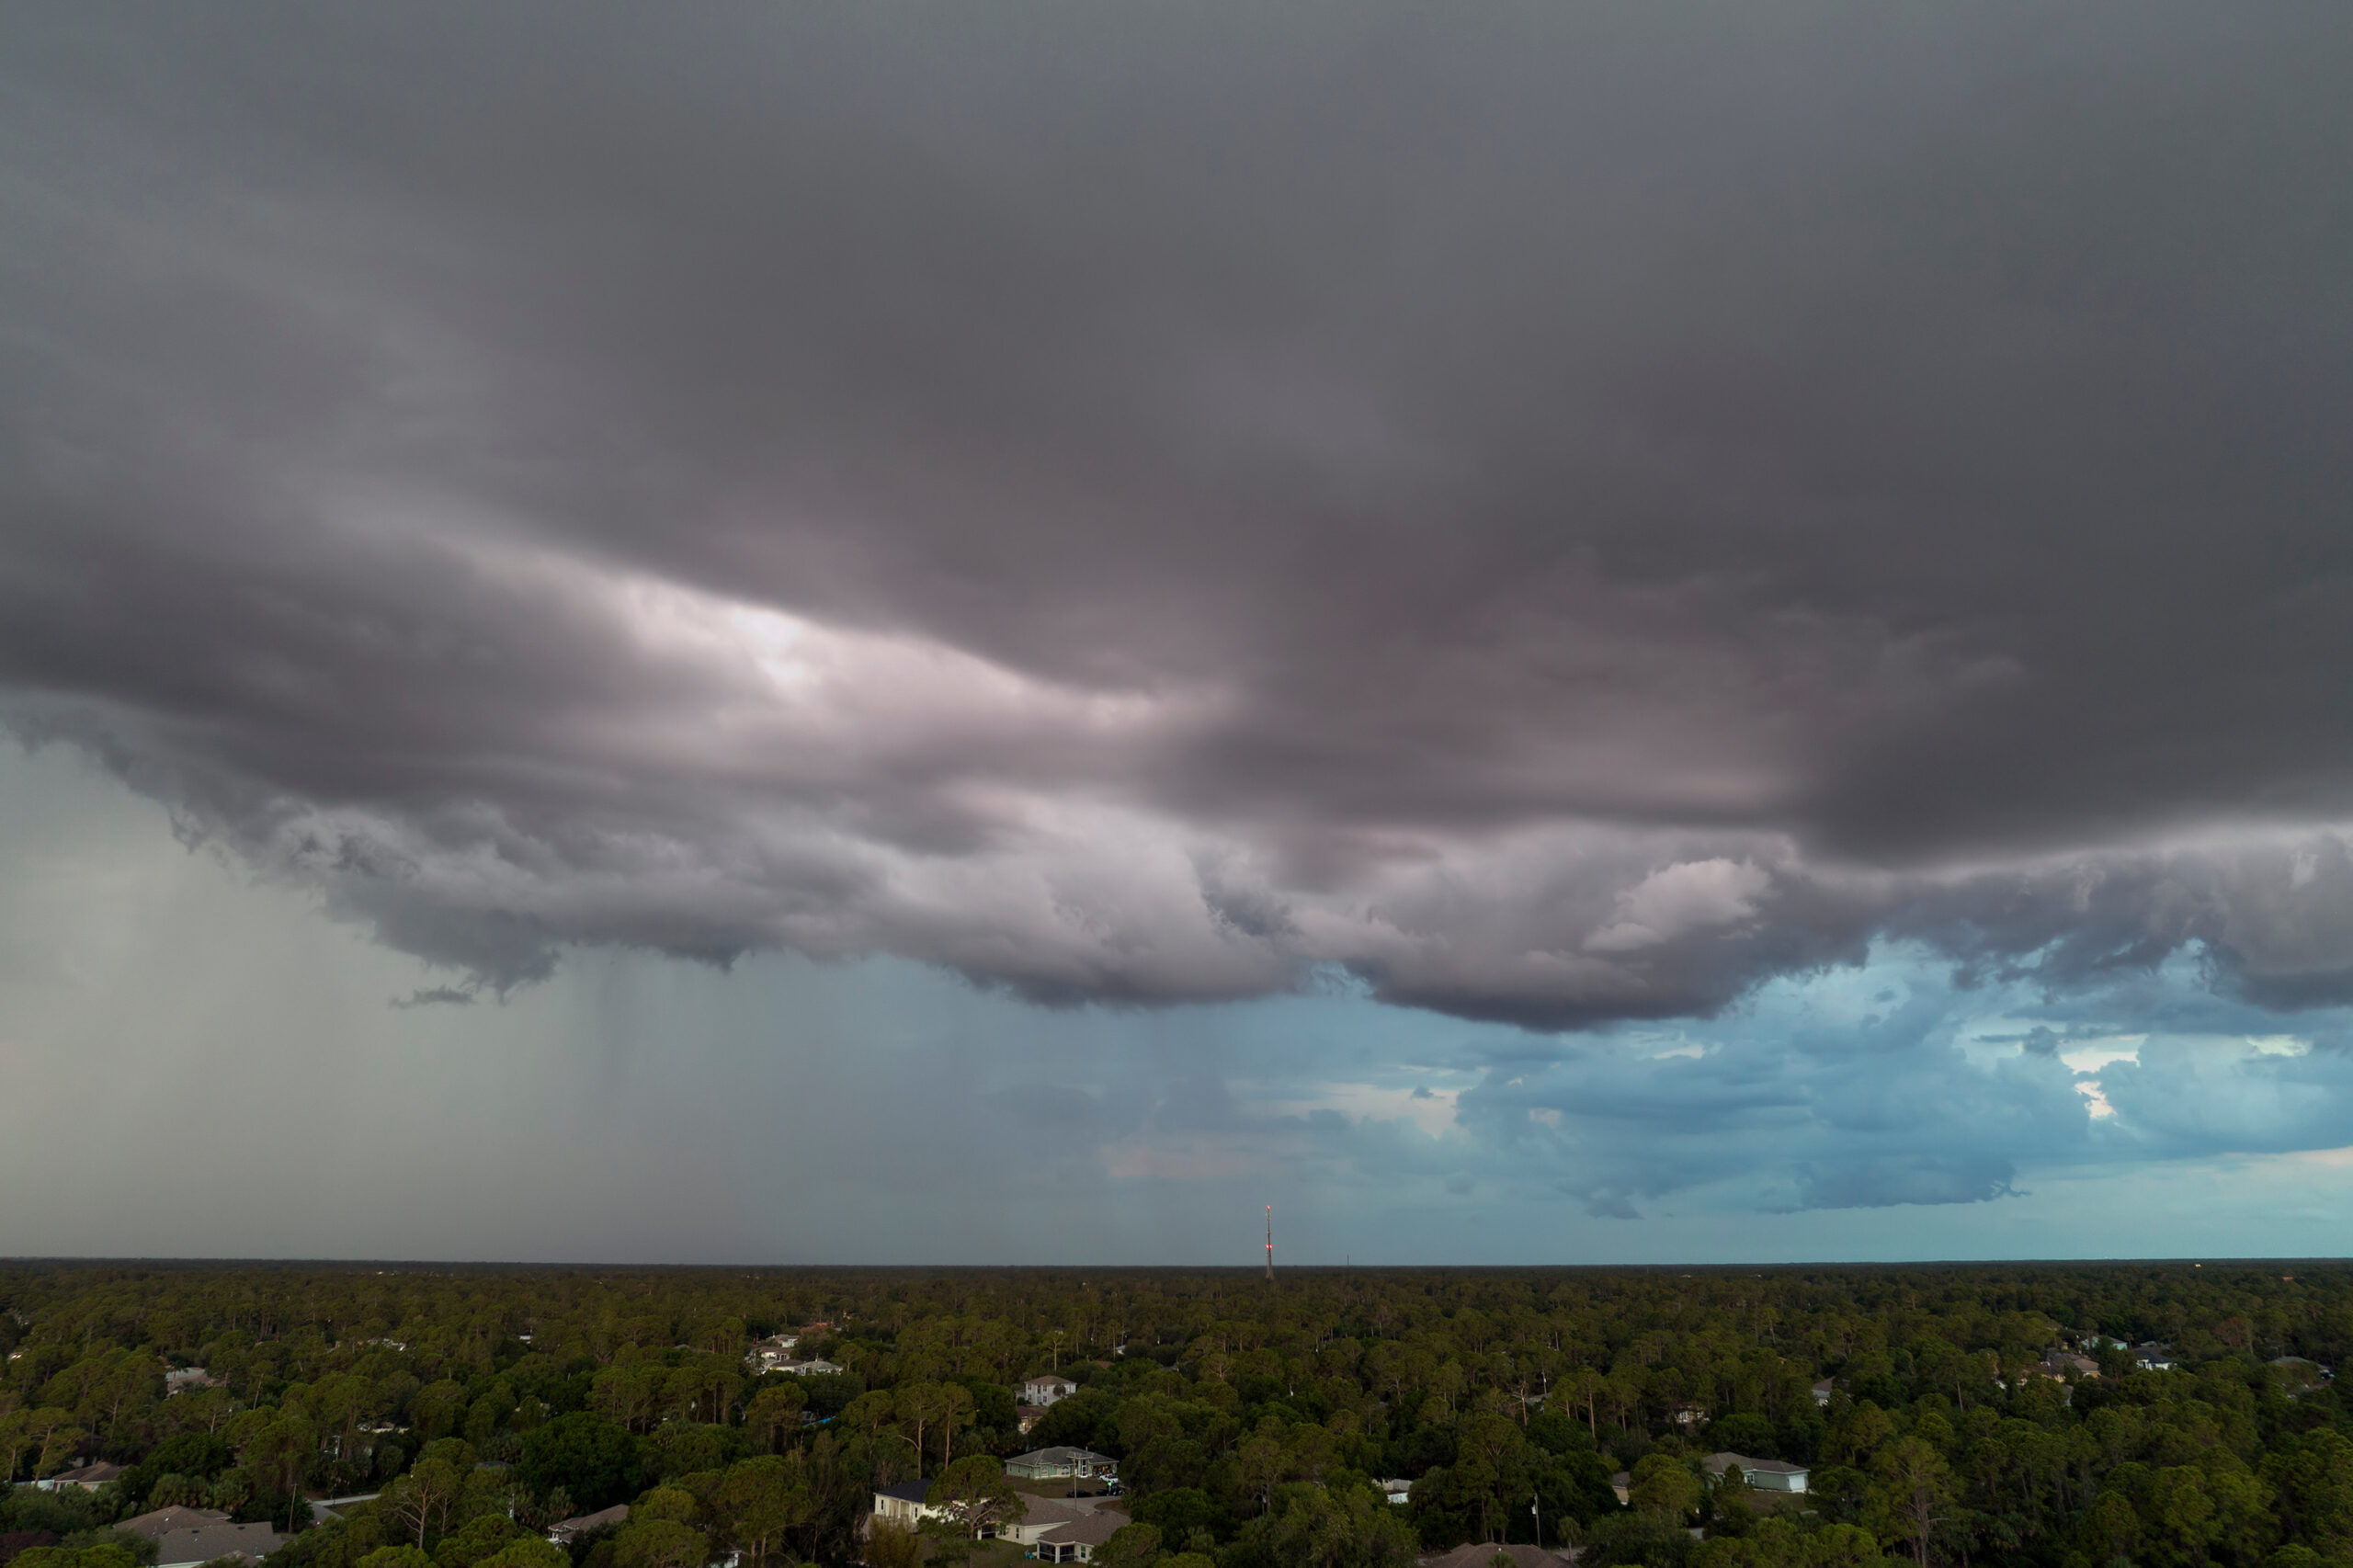 Ominous storm clouds gather over a Florida town.